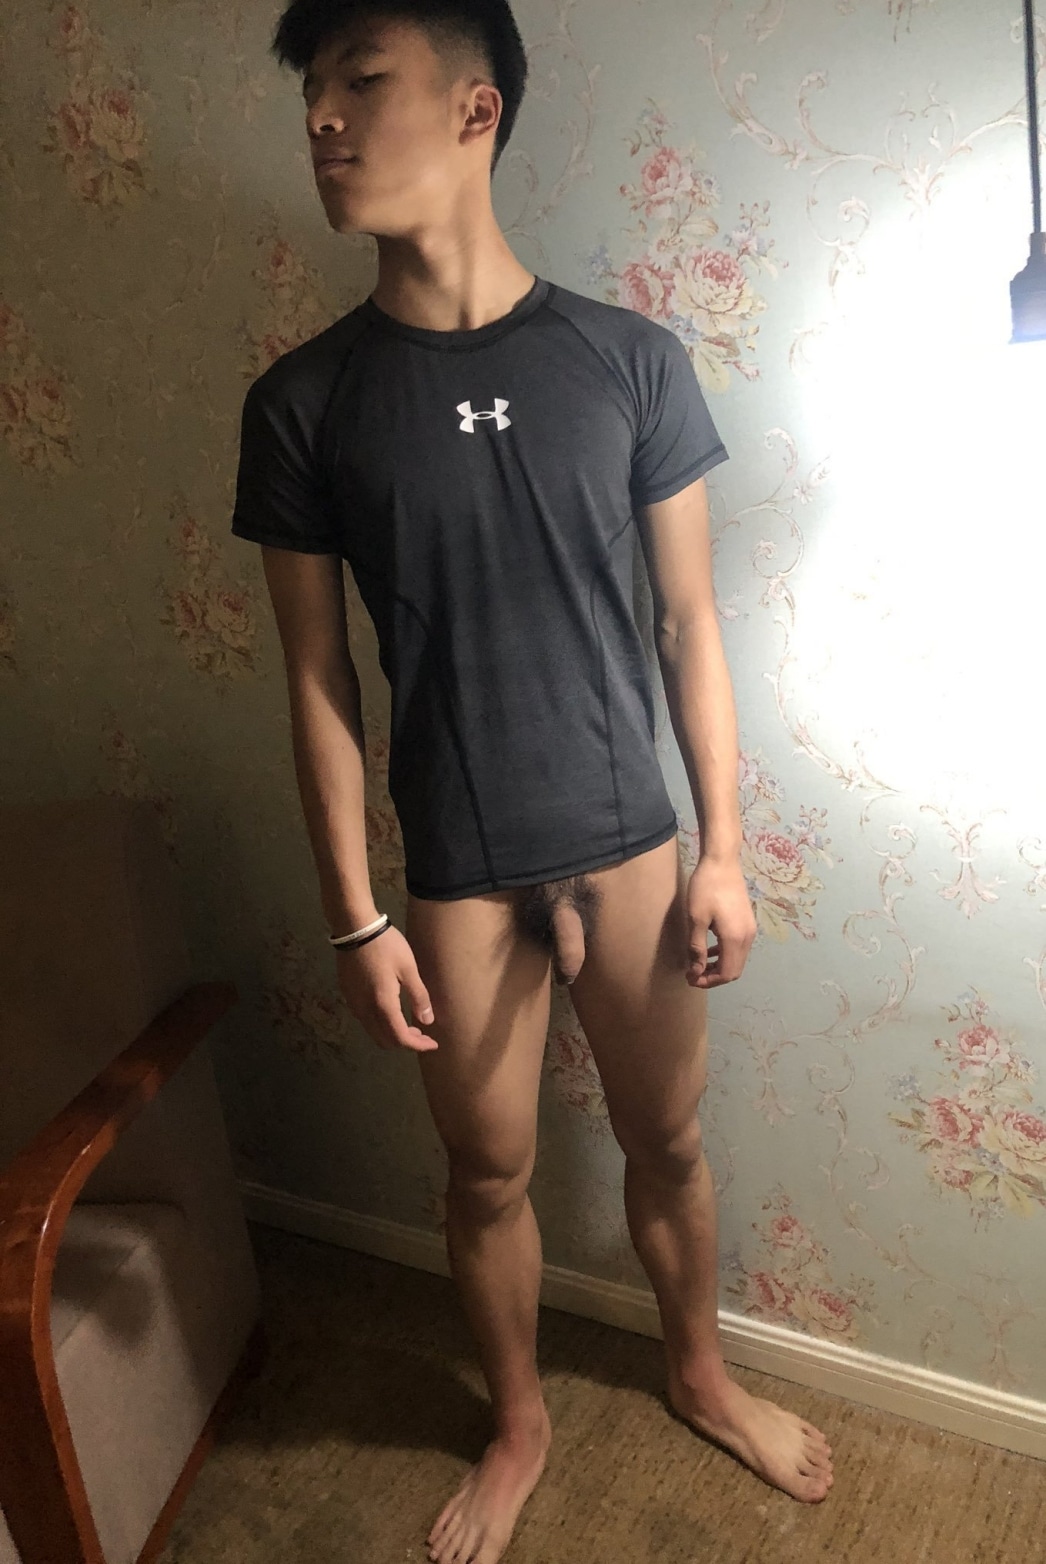 Boy with a soft penis